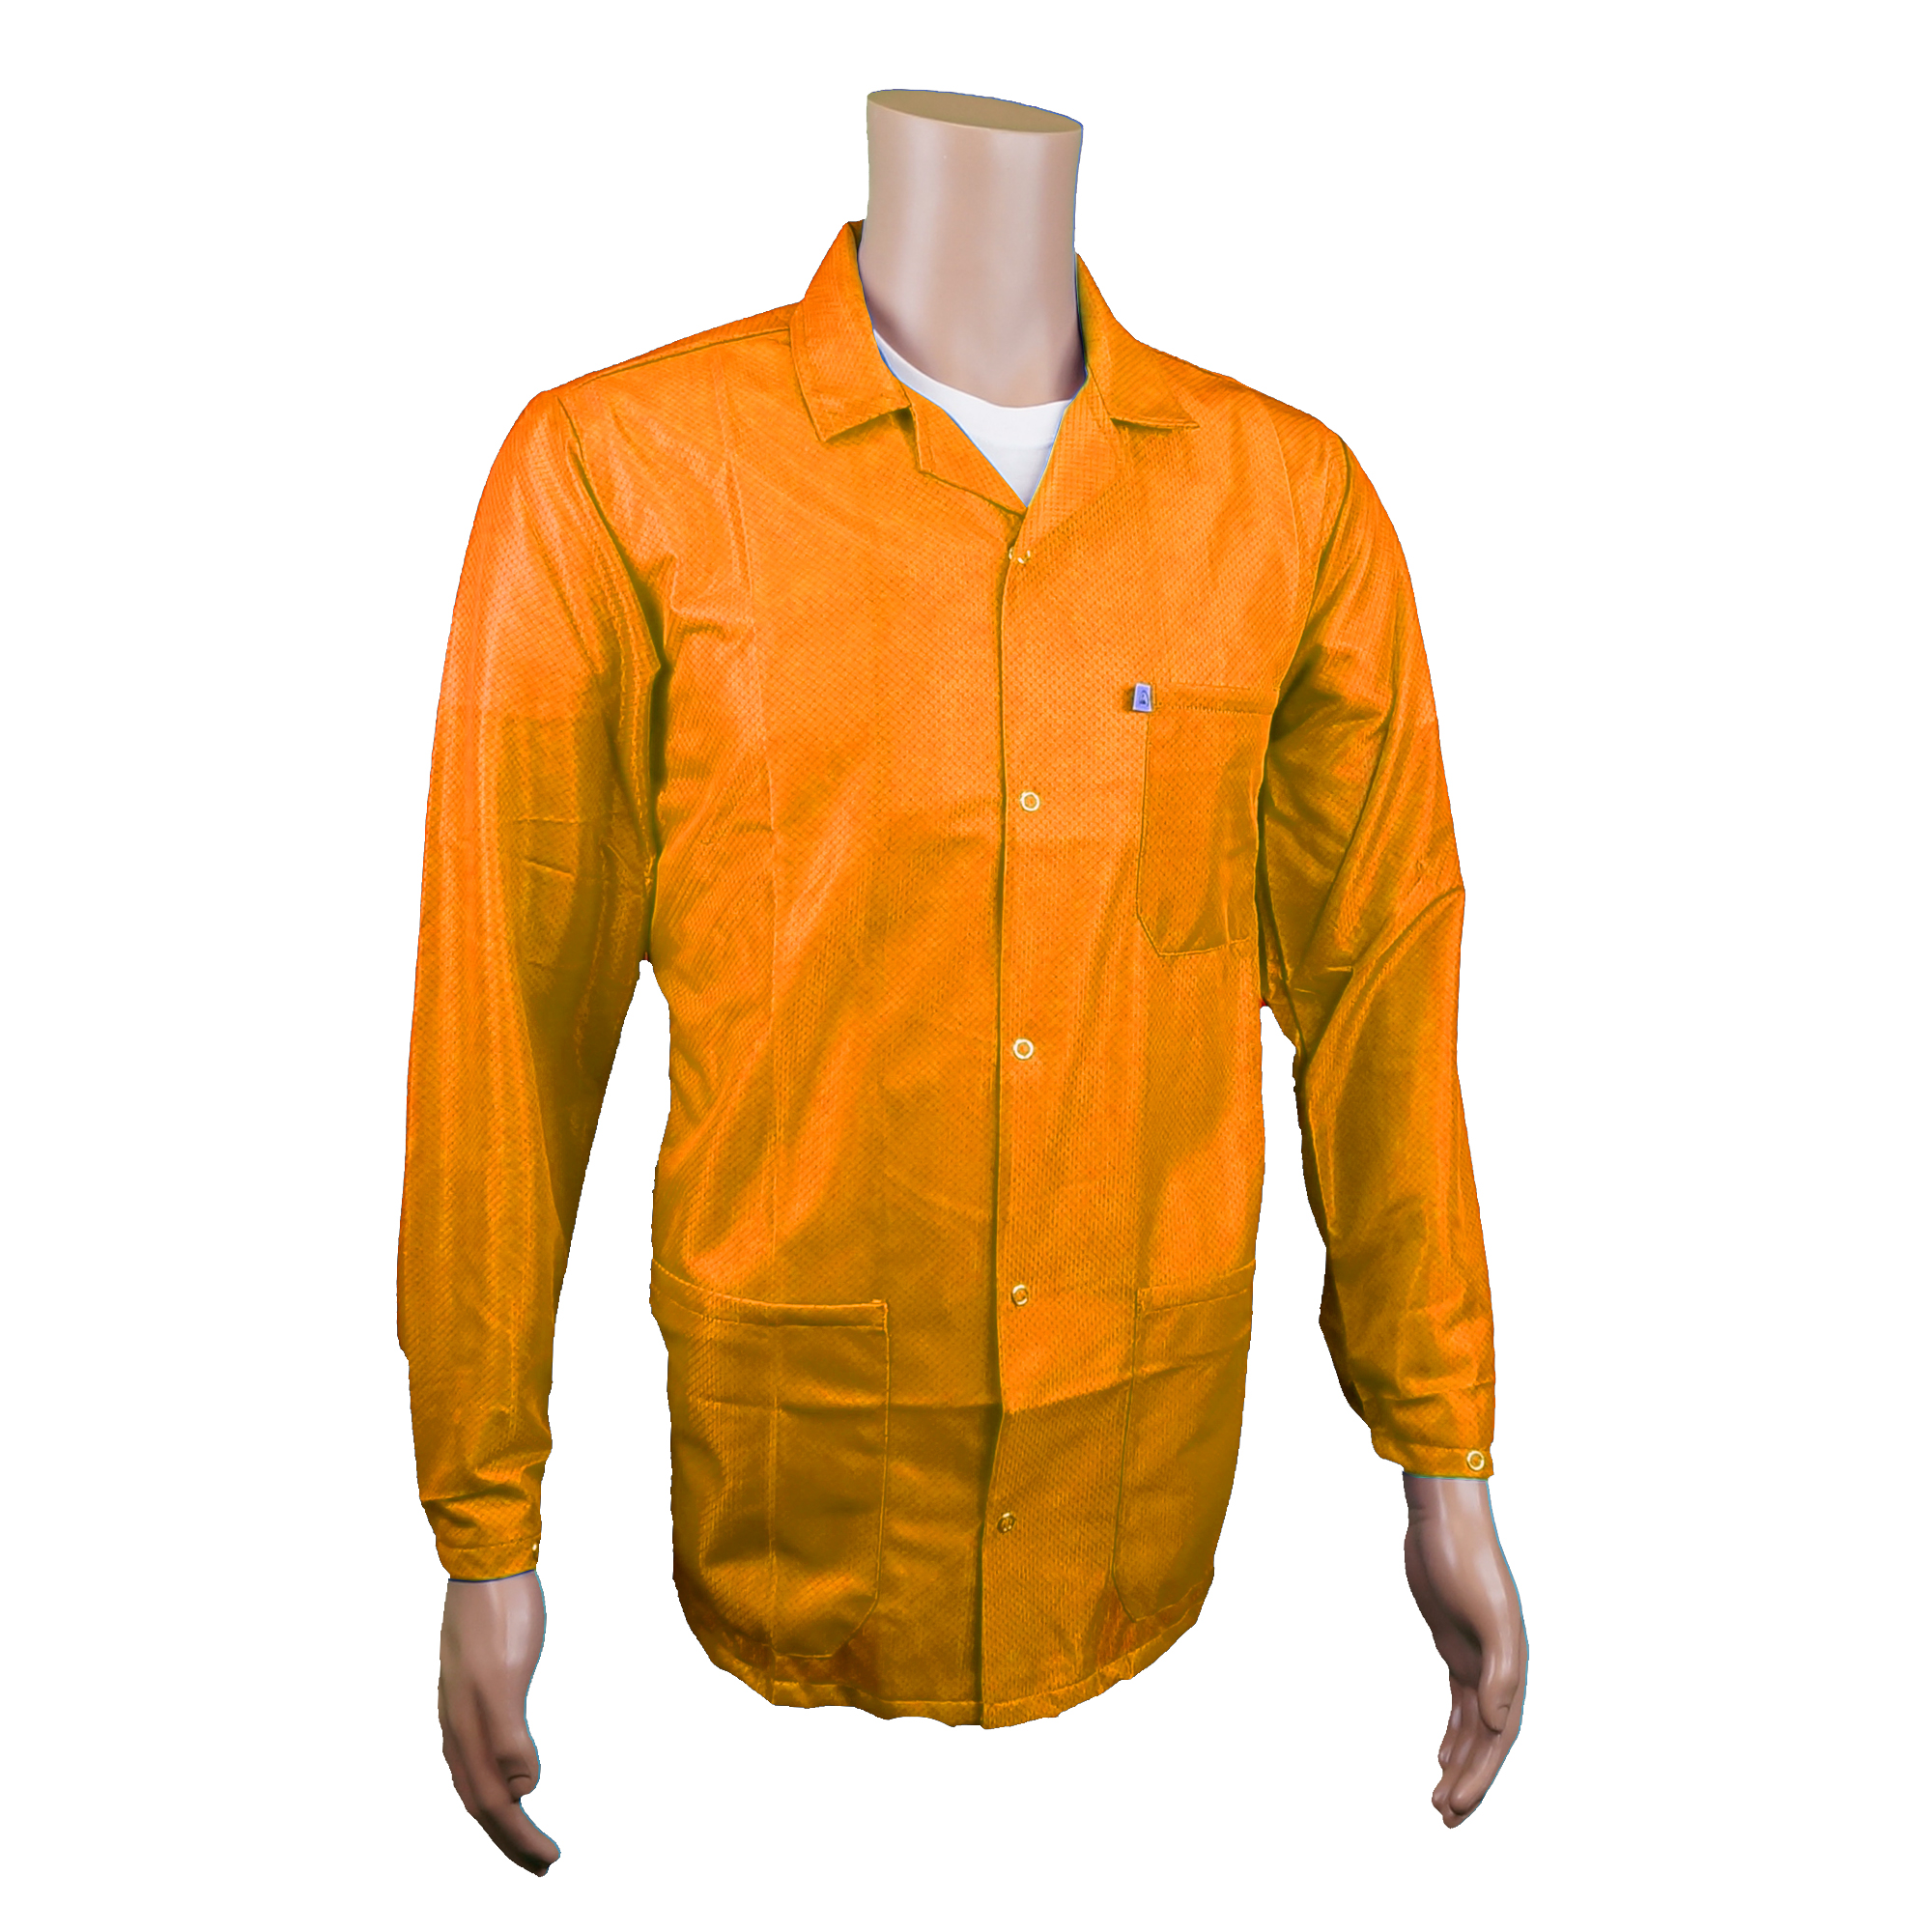 Hi-Vis Orange ESD Jackets with Medium Weight Fabric, a Lapel Collar and ...